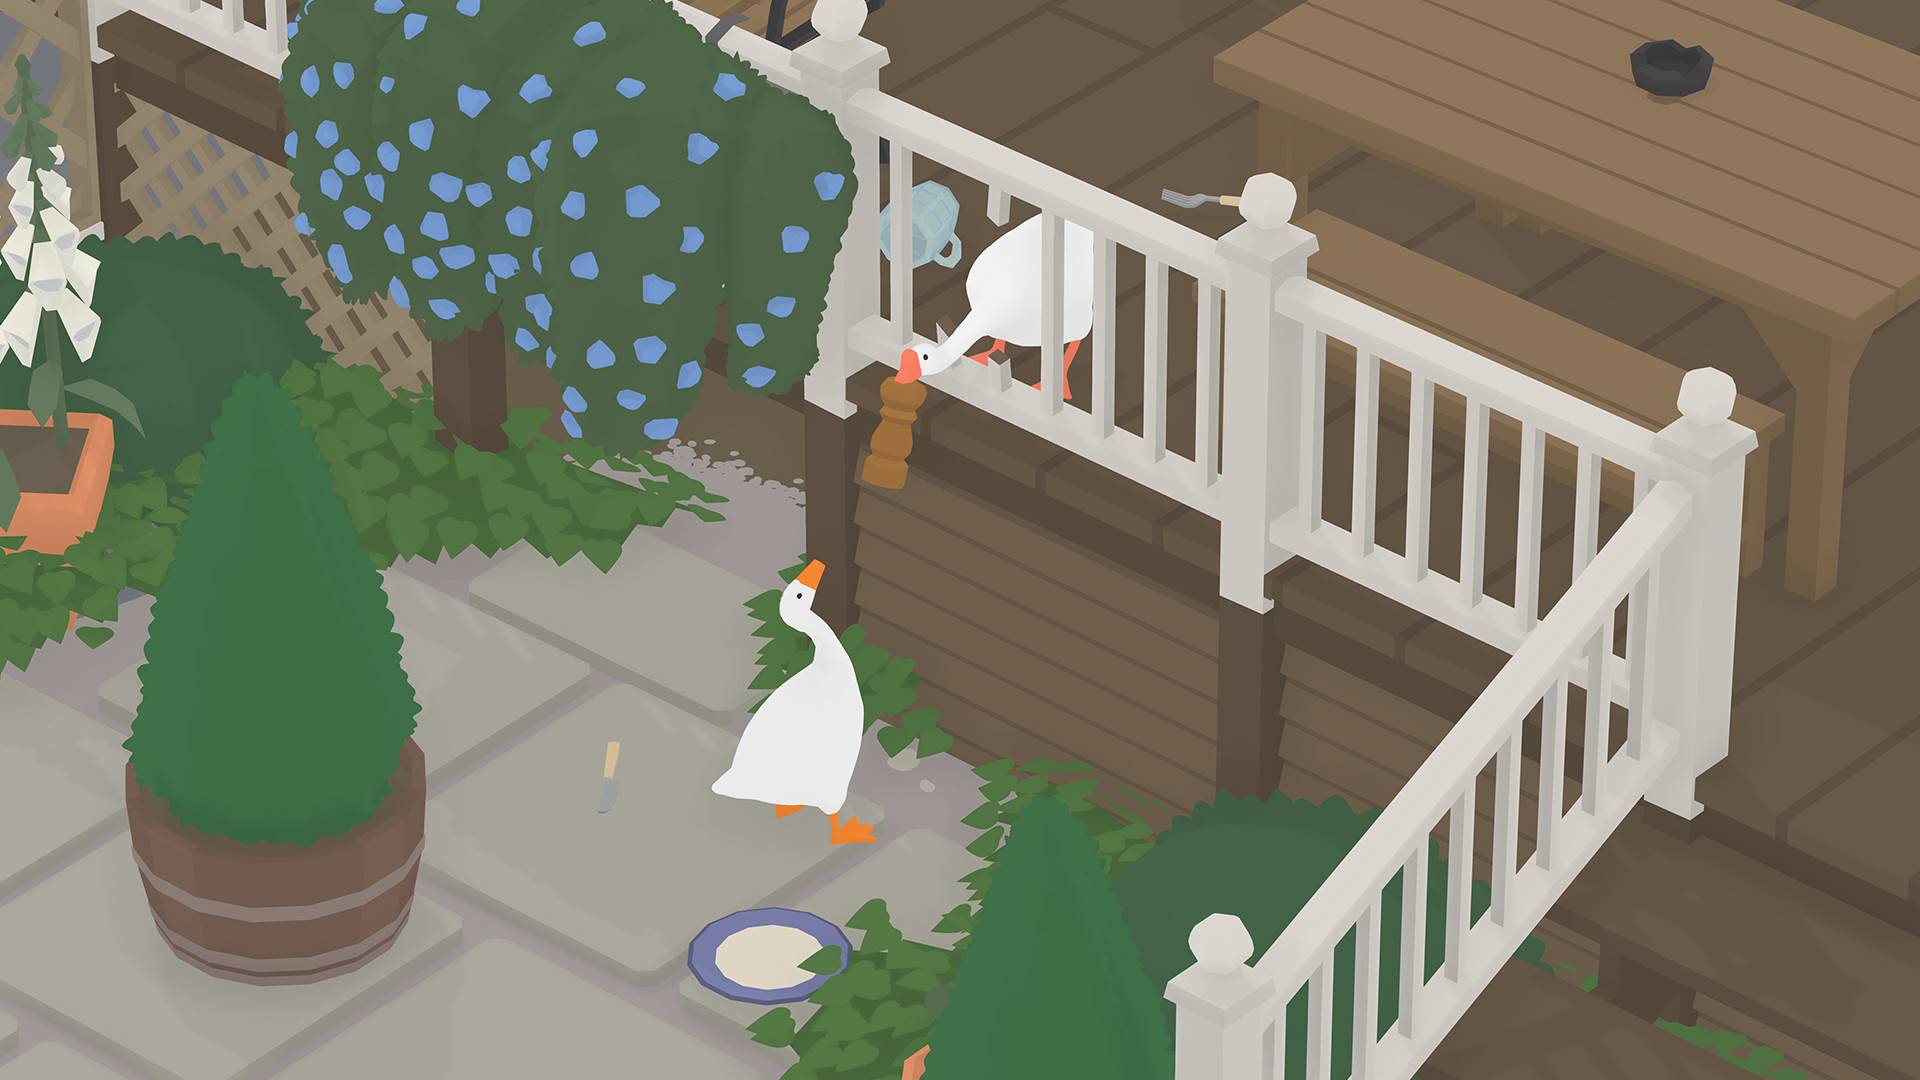 Untitled Goose Game (PC) Key cheap - Price of $1.07 for Steam